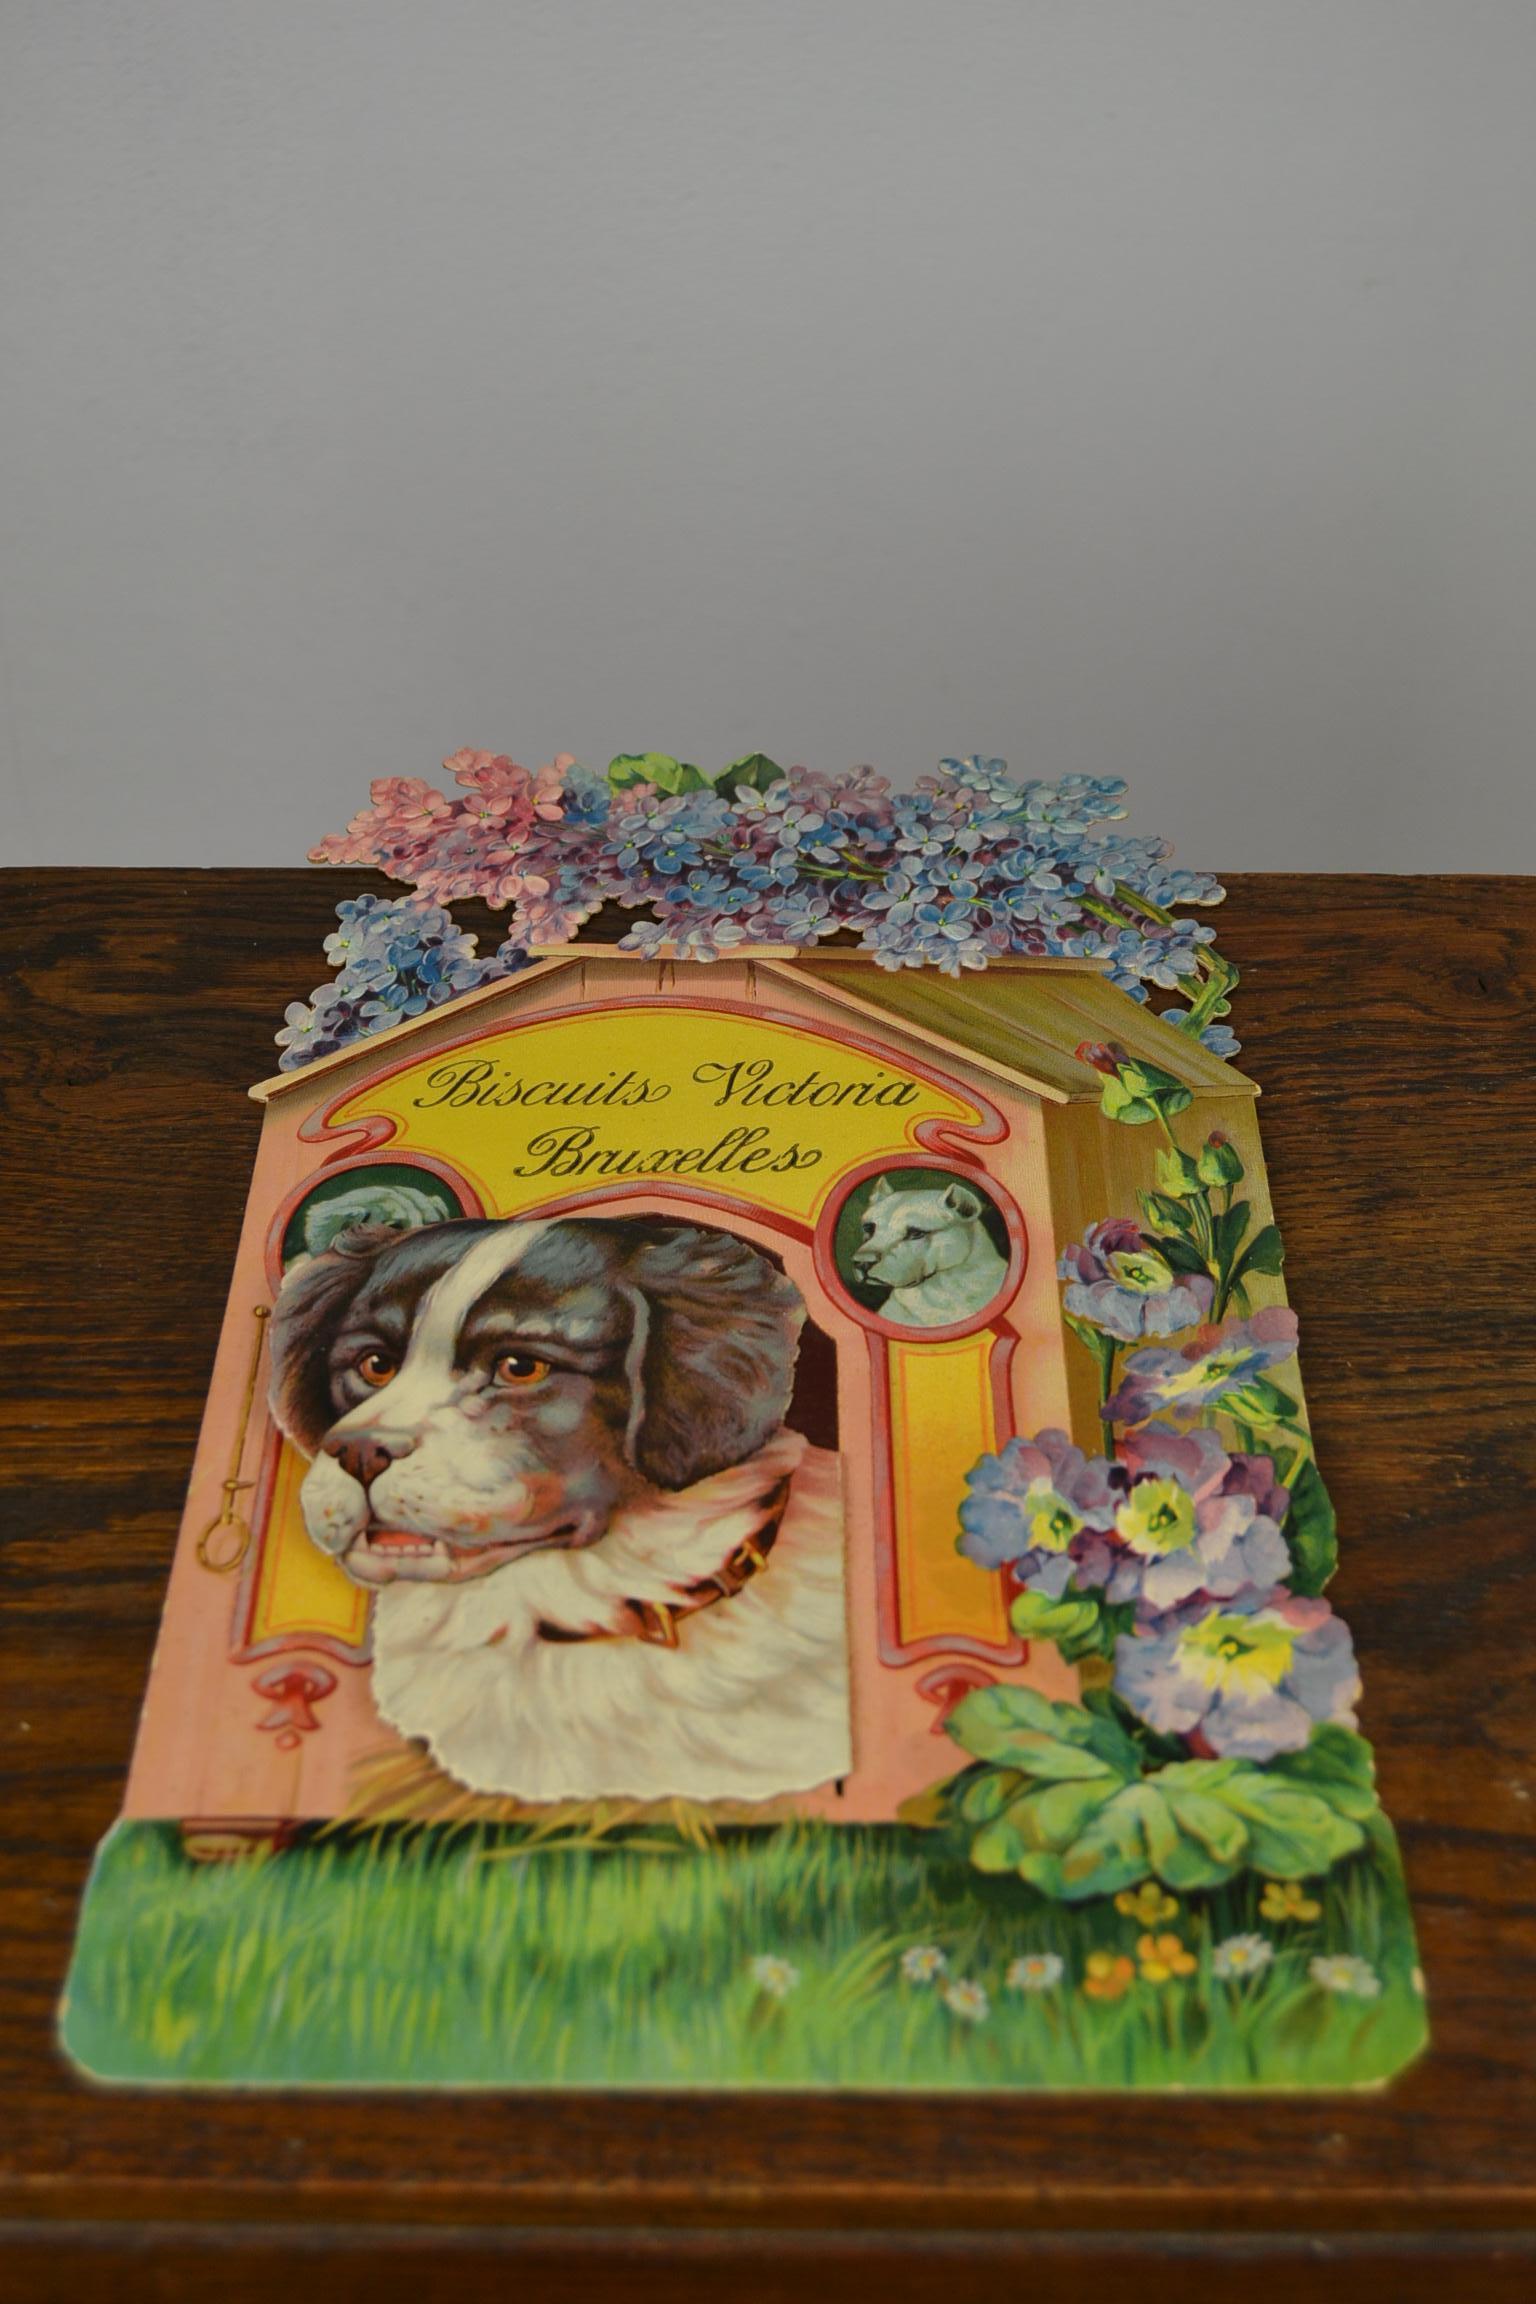 Antique Advertising Sign Biscuits Victoria Brussels Belgium with Suchard Dog 4